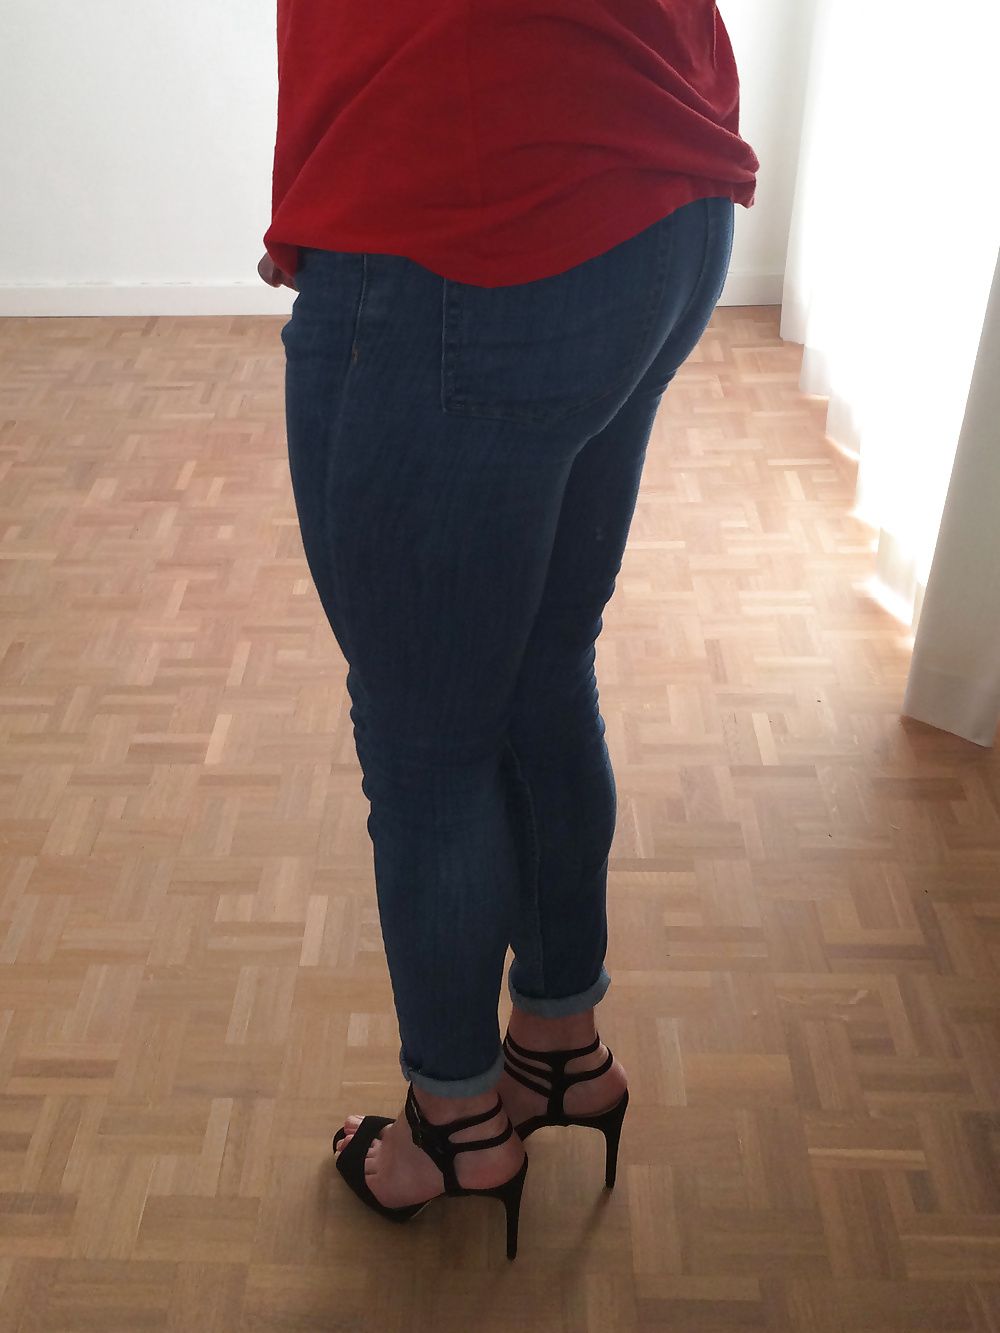 Jeans & red top, whale tail :) #12